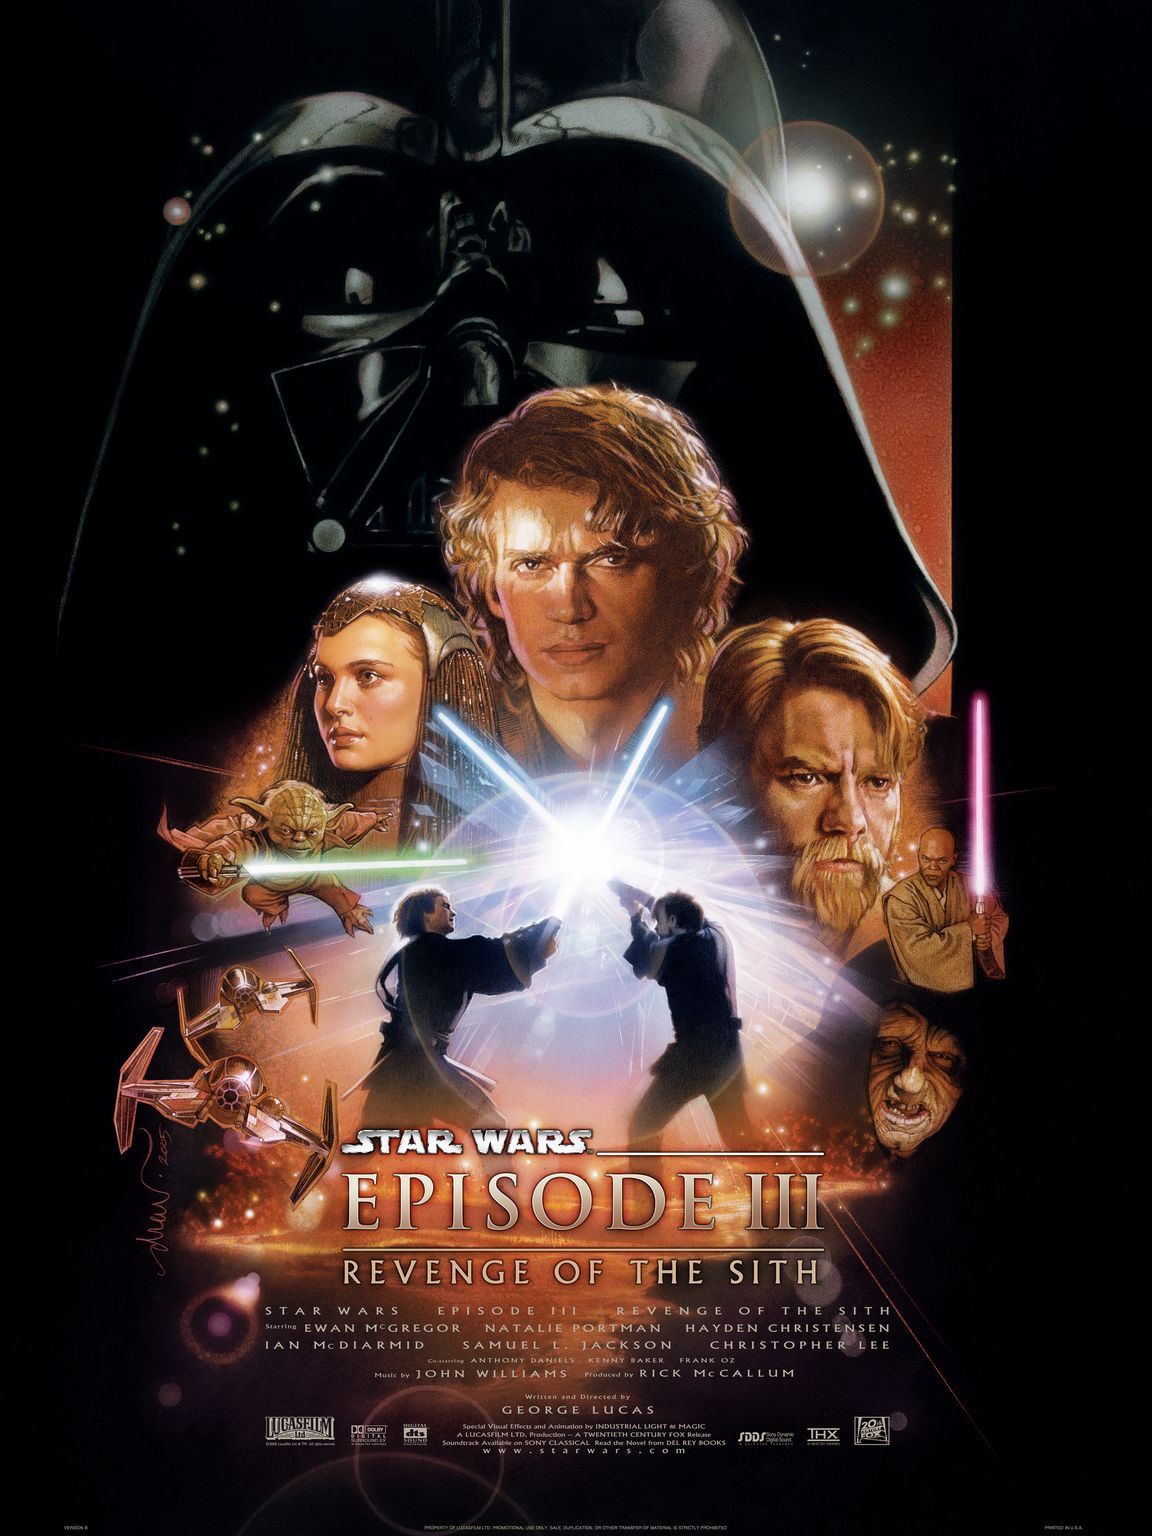 Star Wars Episode III - Revenge of the Sith Film Poster